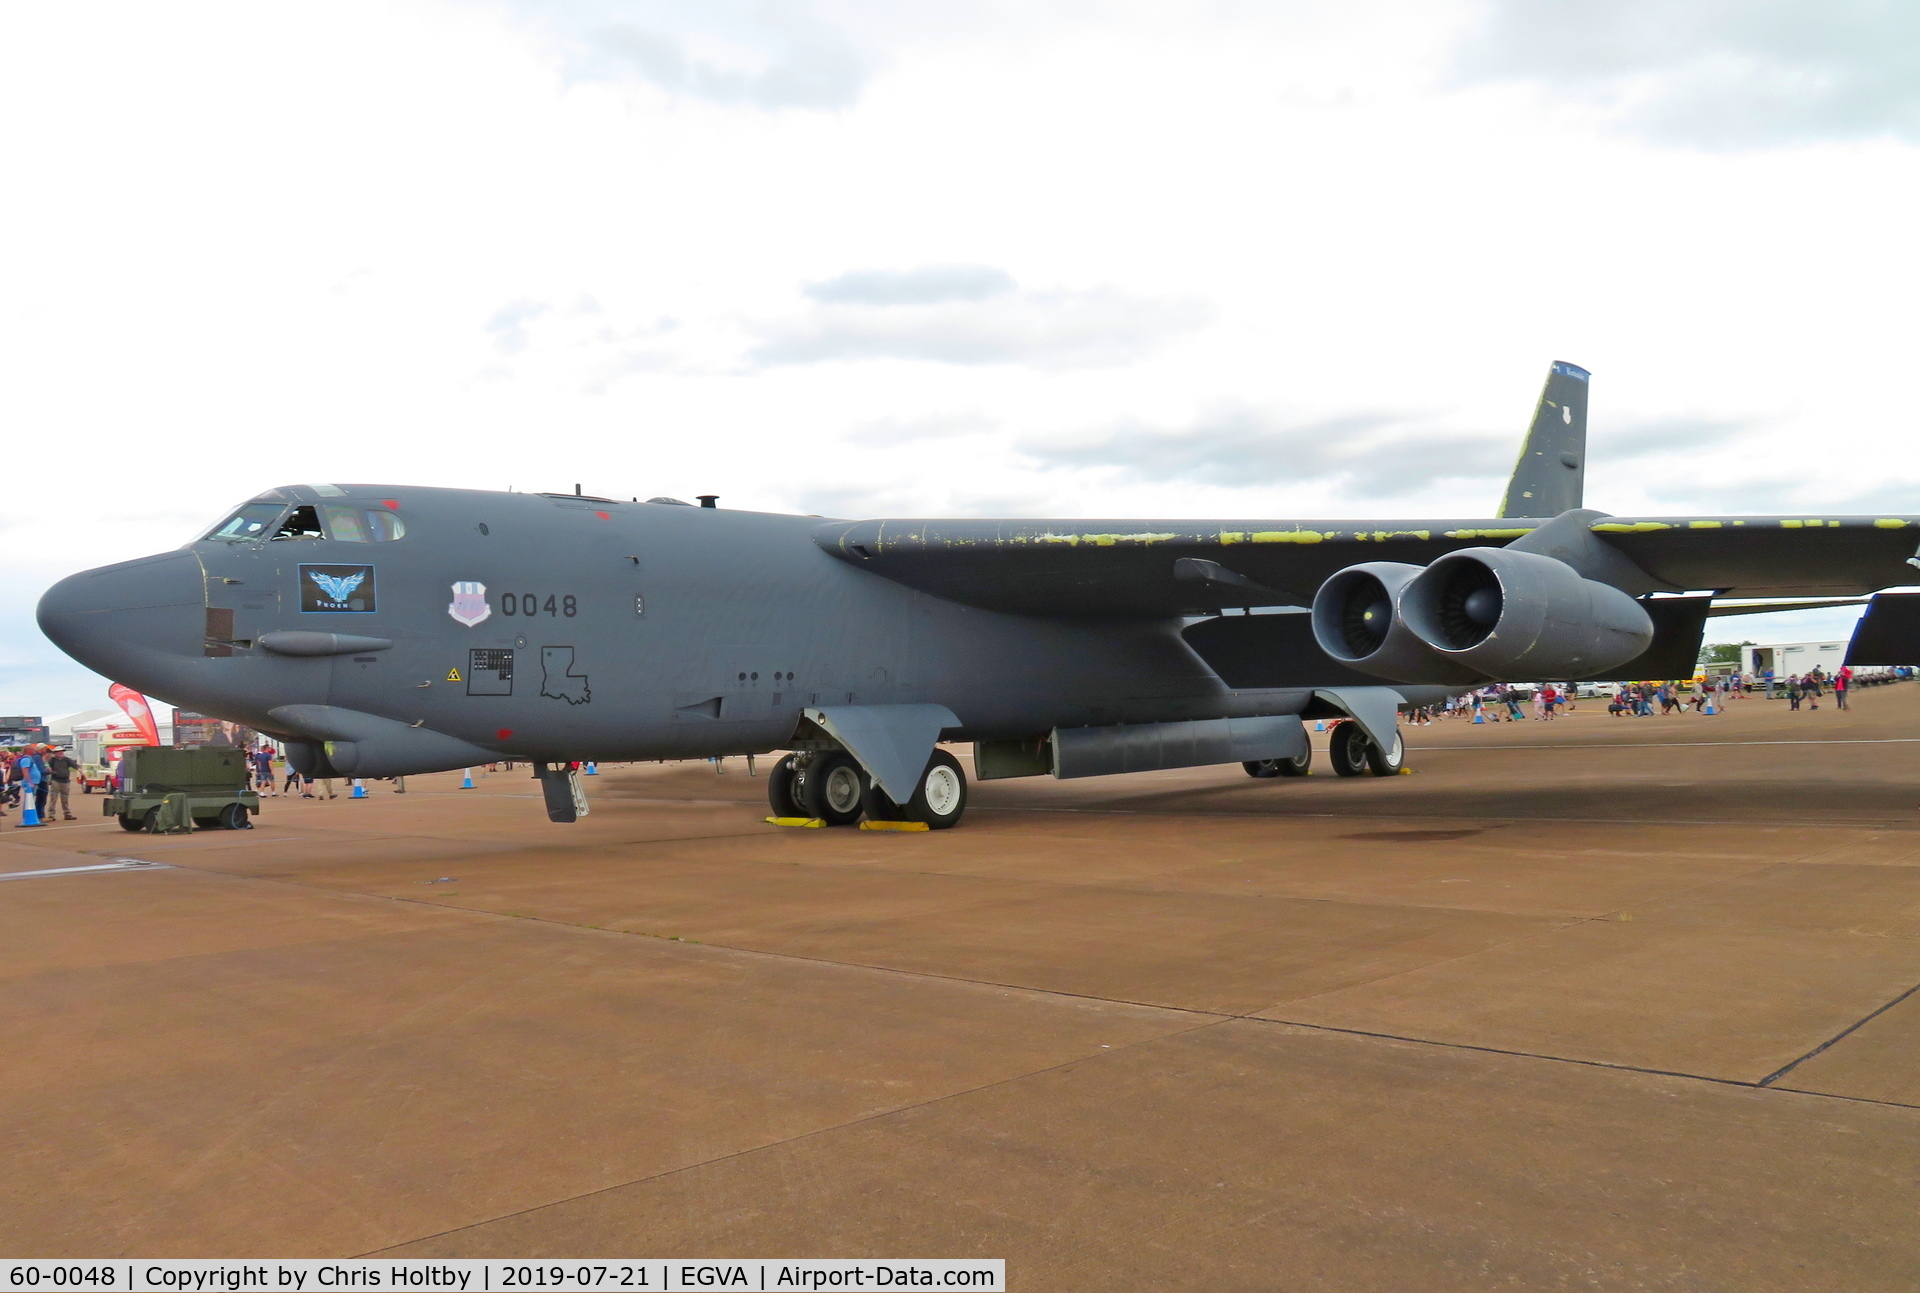 60-0048, 1960 Boeing B-52H Stratofortress C/N 464413, Parked in the static display area (and taking up most of it) 'Phoenix' the Stratofortress at RIAT 2019 RAF Fairford